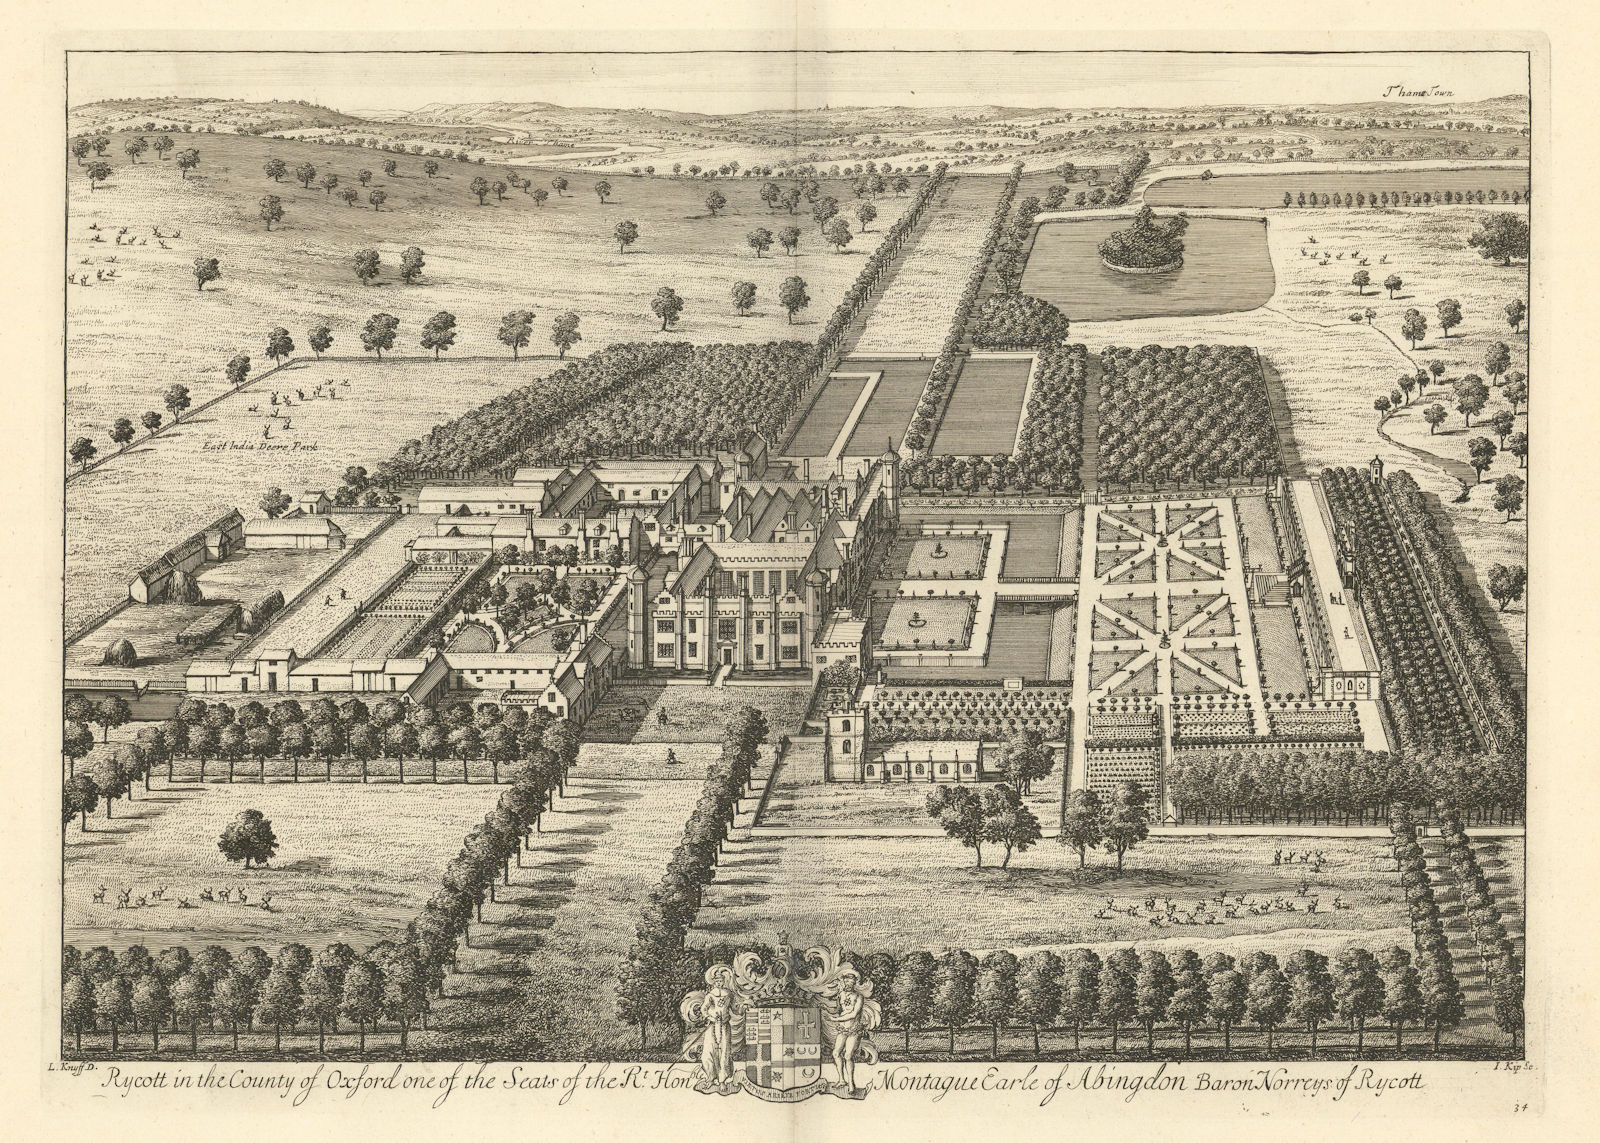 Associate Product Rycote House, Oxfordshire by Kip & Knyff. "Rycott in the County of Oxford" 1709